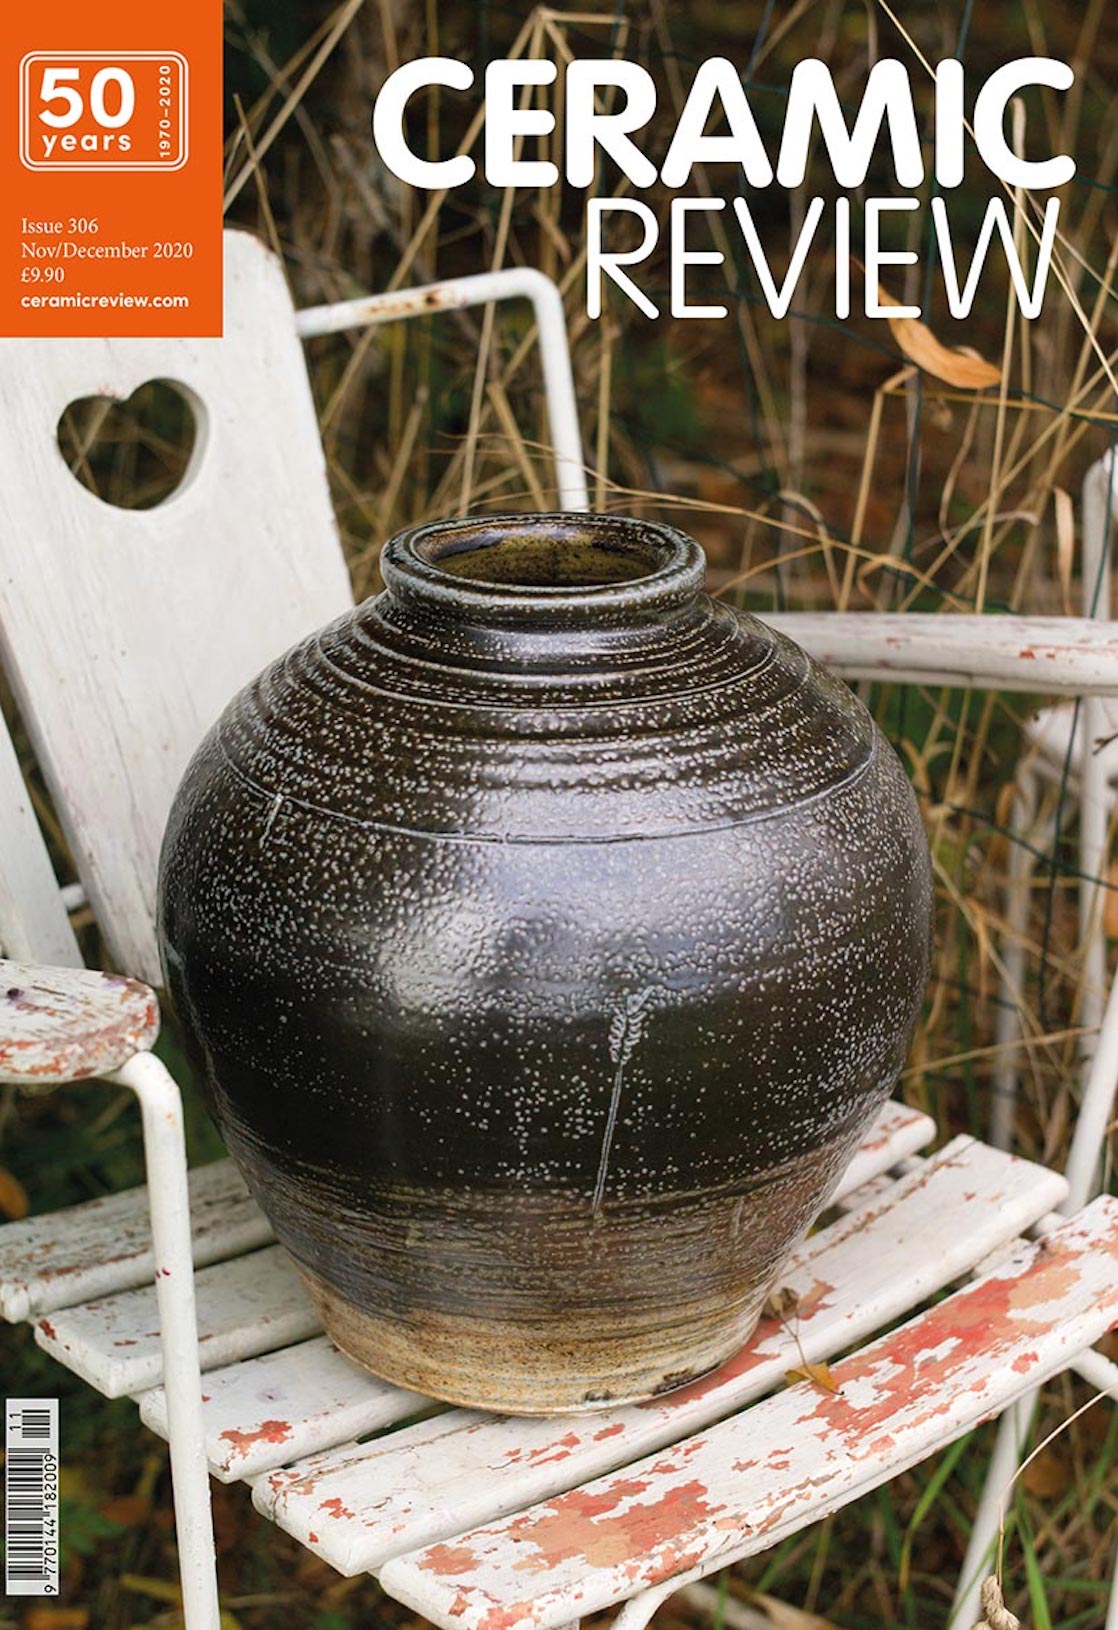 Issue 3067of Ceramic Review